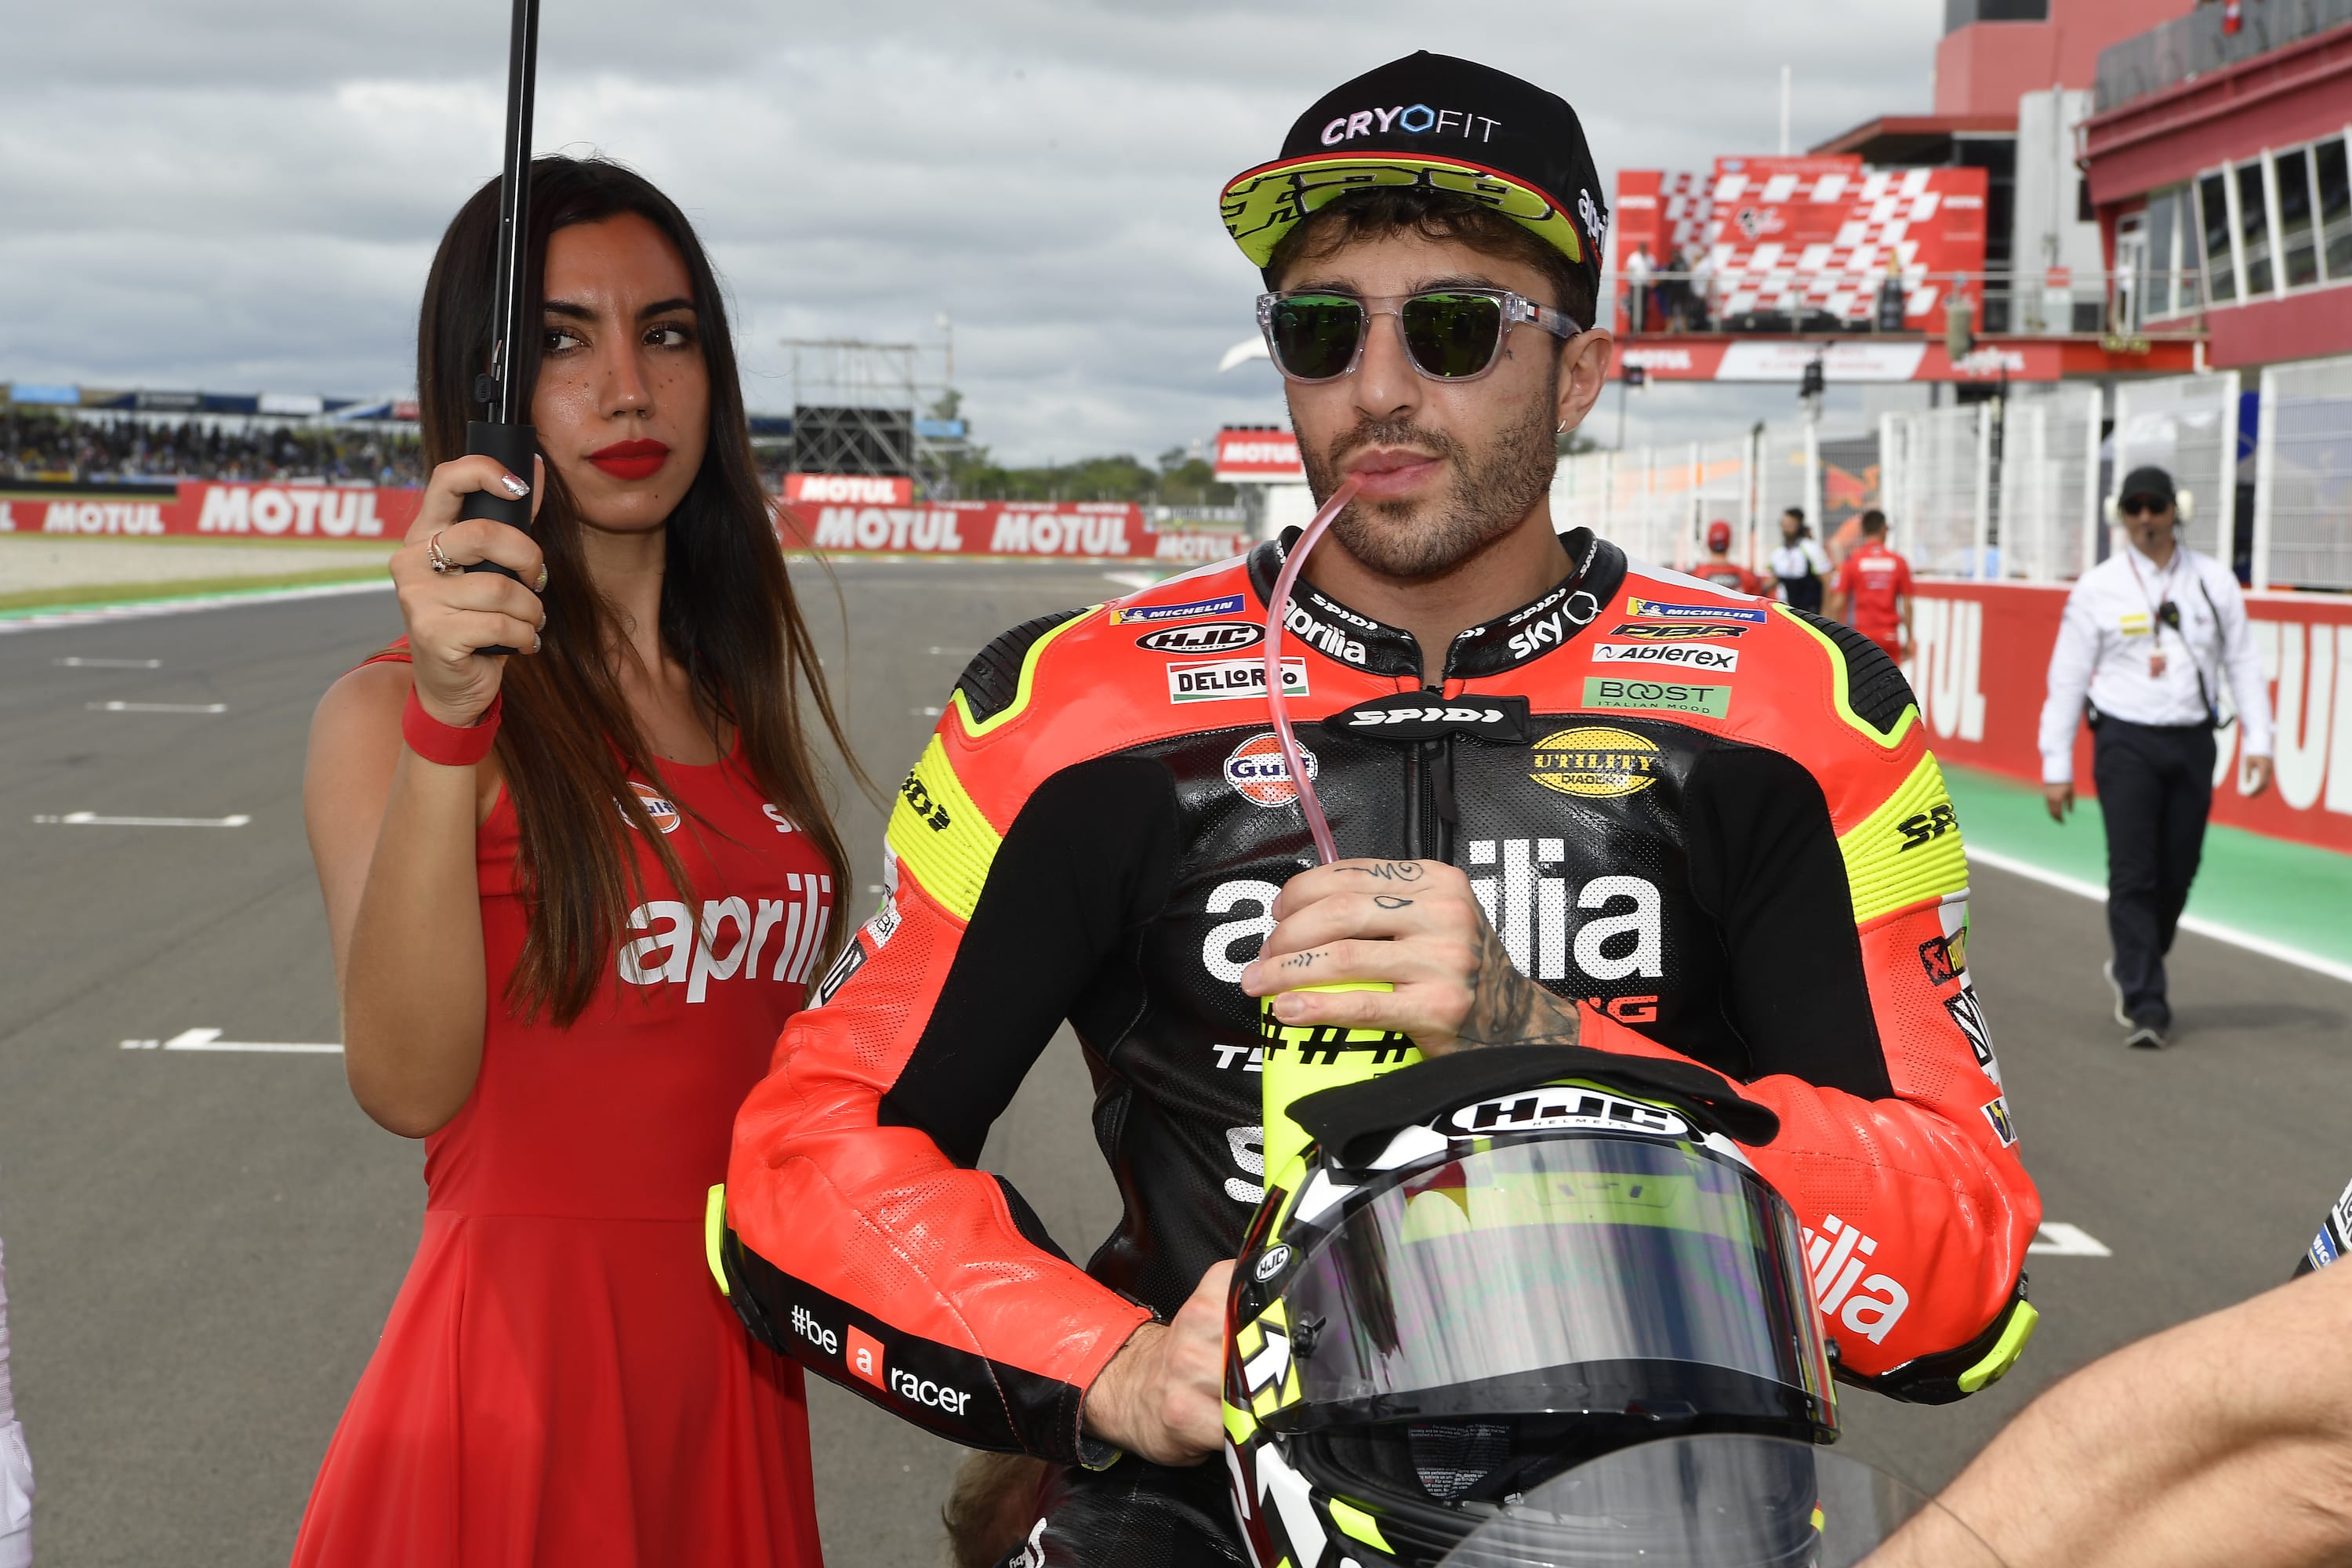 Iannone - also B-test positive
- also in the app MOTORCYCLE NEWS